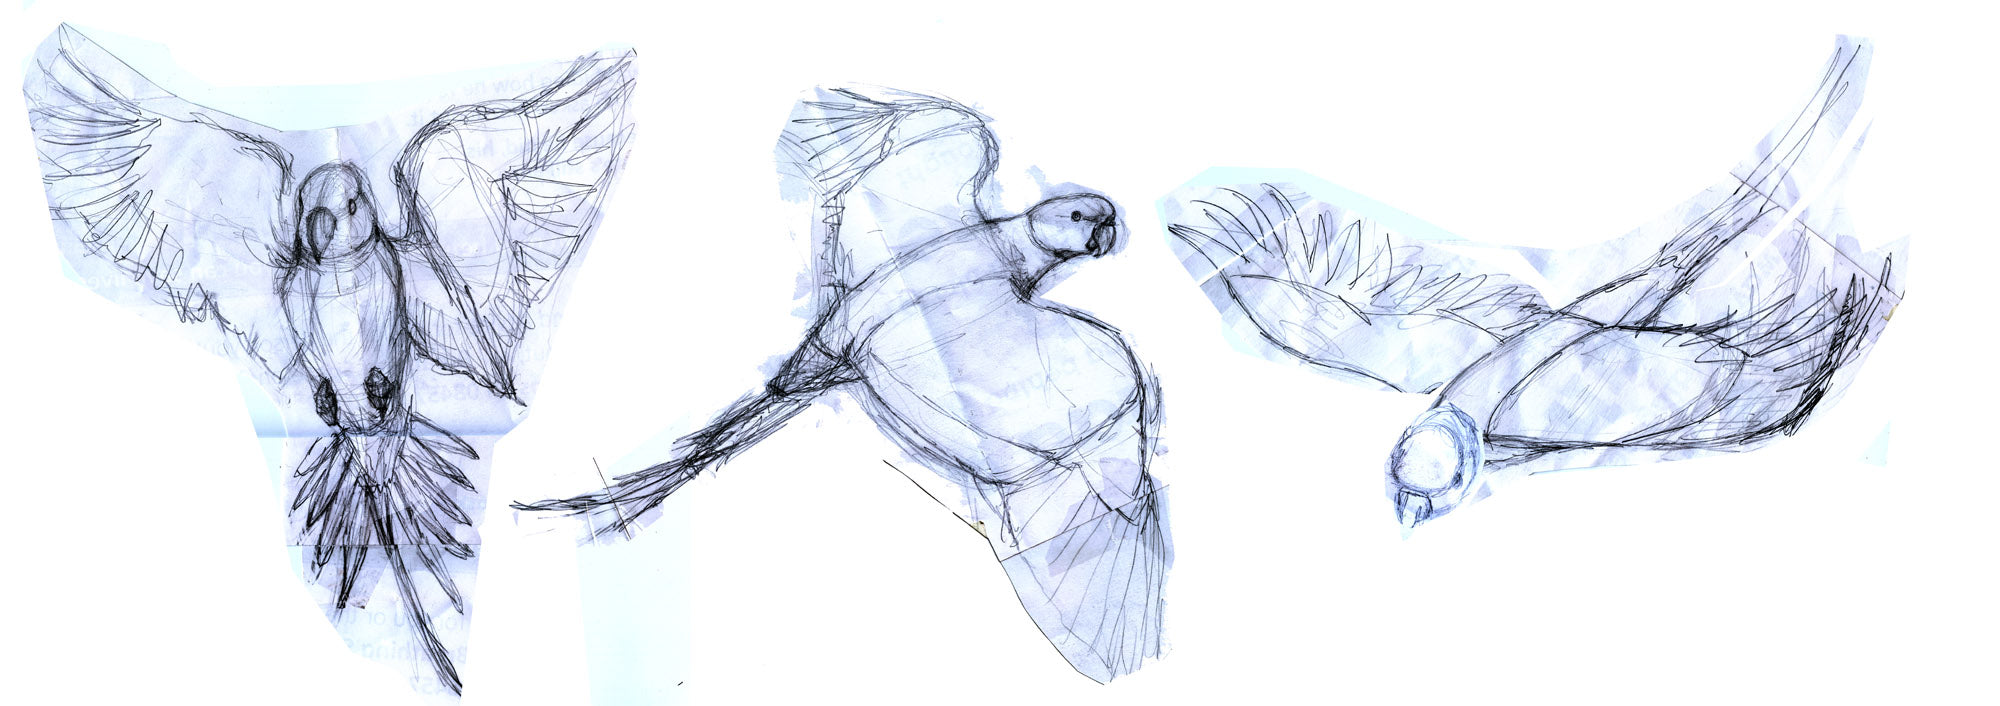 Sketches of flying parakeets